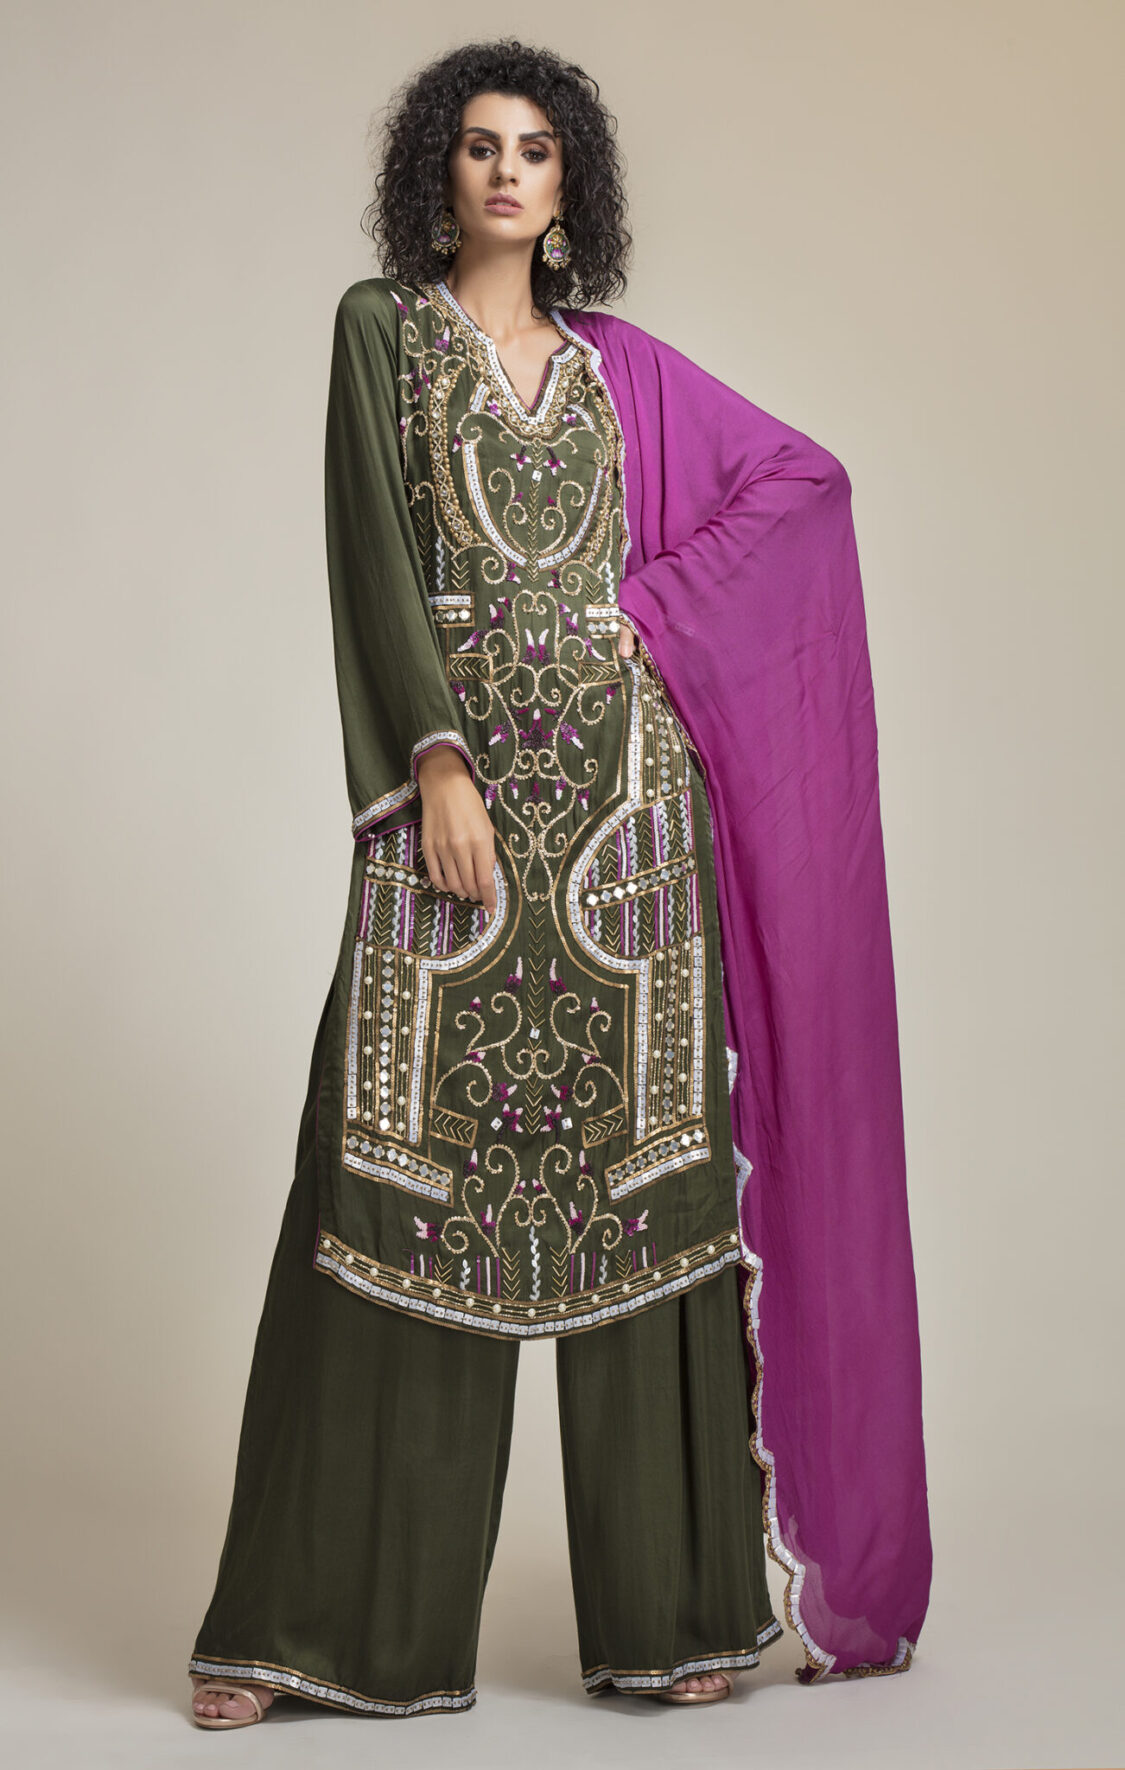 Buy Designer Silk Embroidered Suit at Folklore in India - Canada | Folklore Collections - 2, Fashion designer clothing women designer clothing, women clothing online, designer clothes on sale, designer sale canada, designer clothes toronto, popular clothing stores in toronto